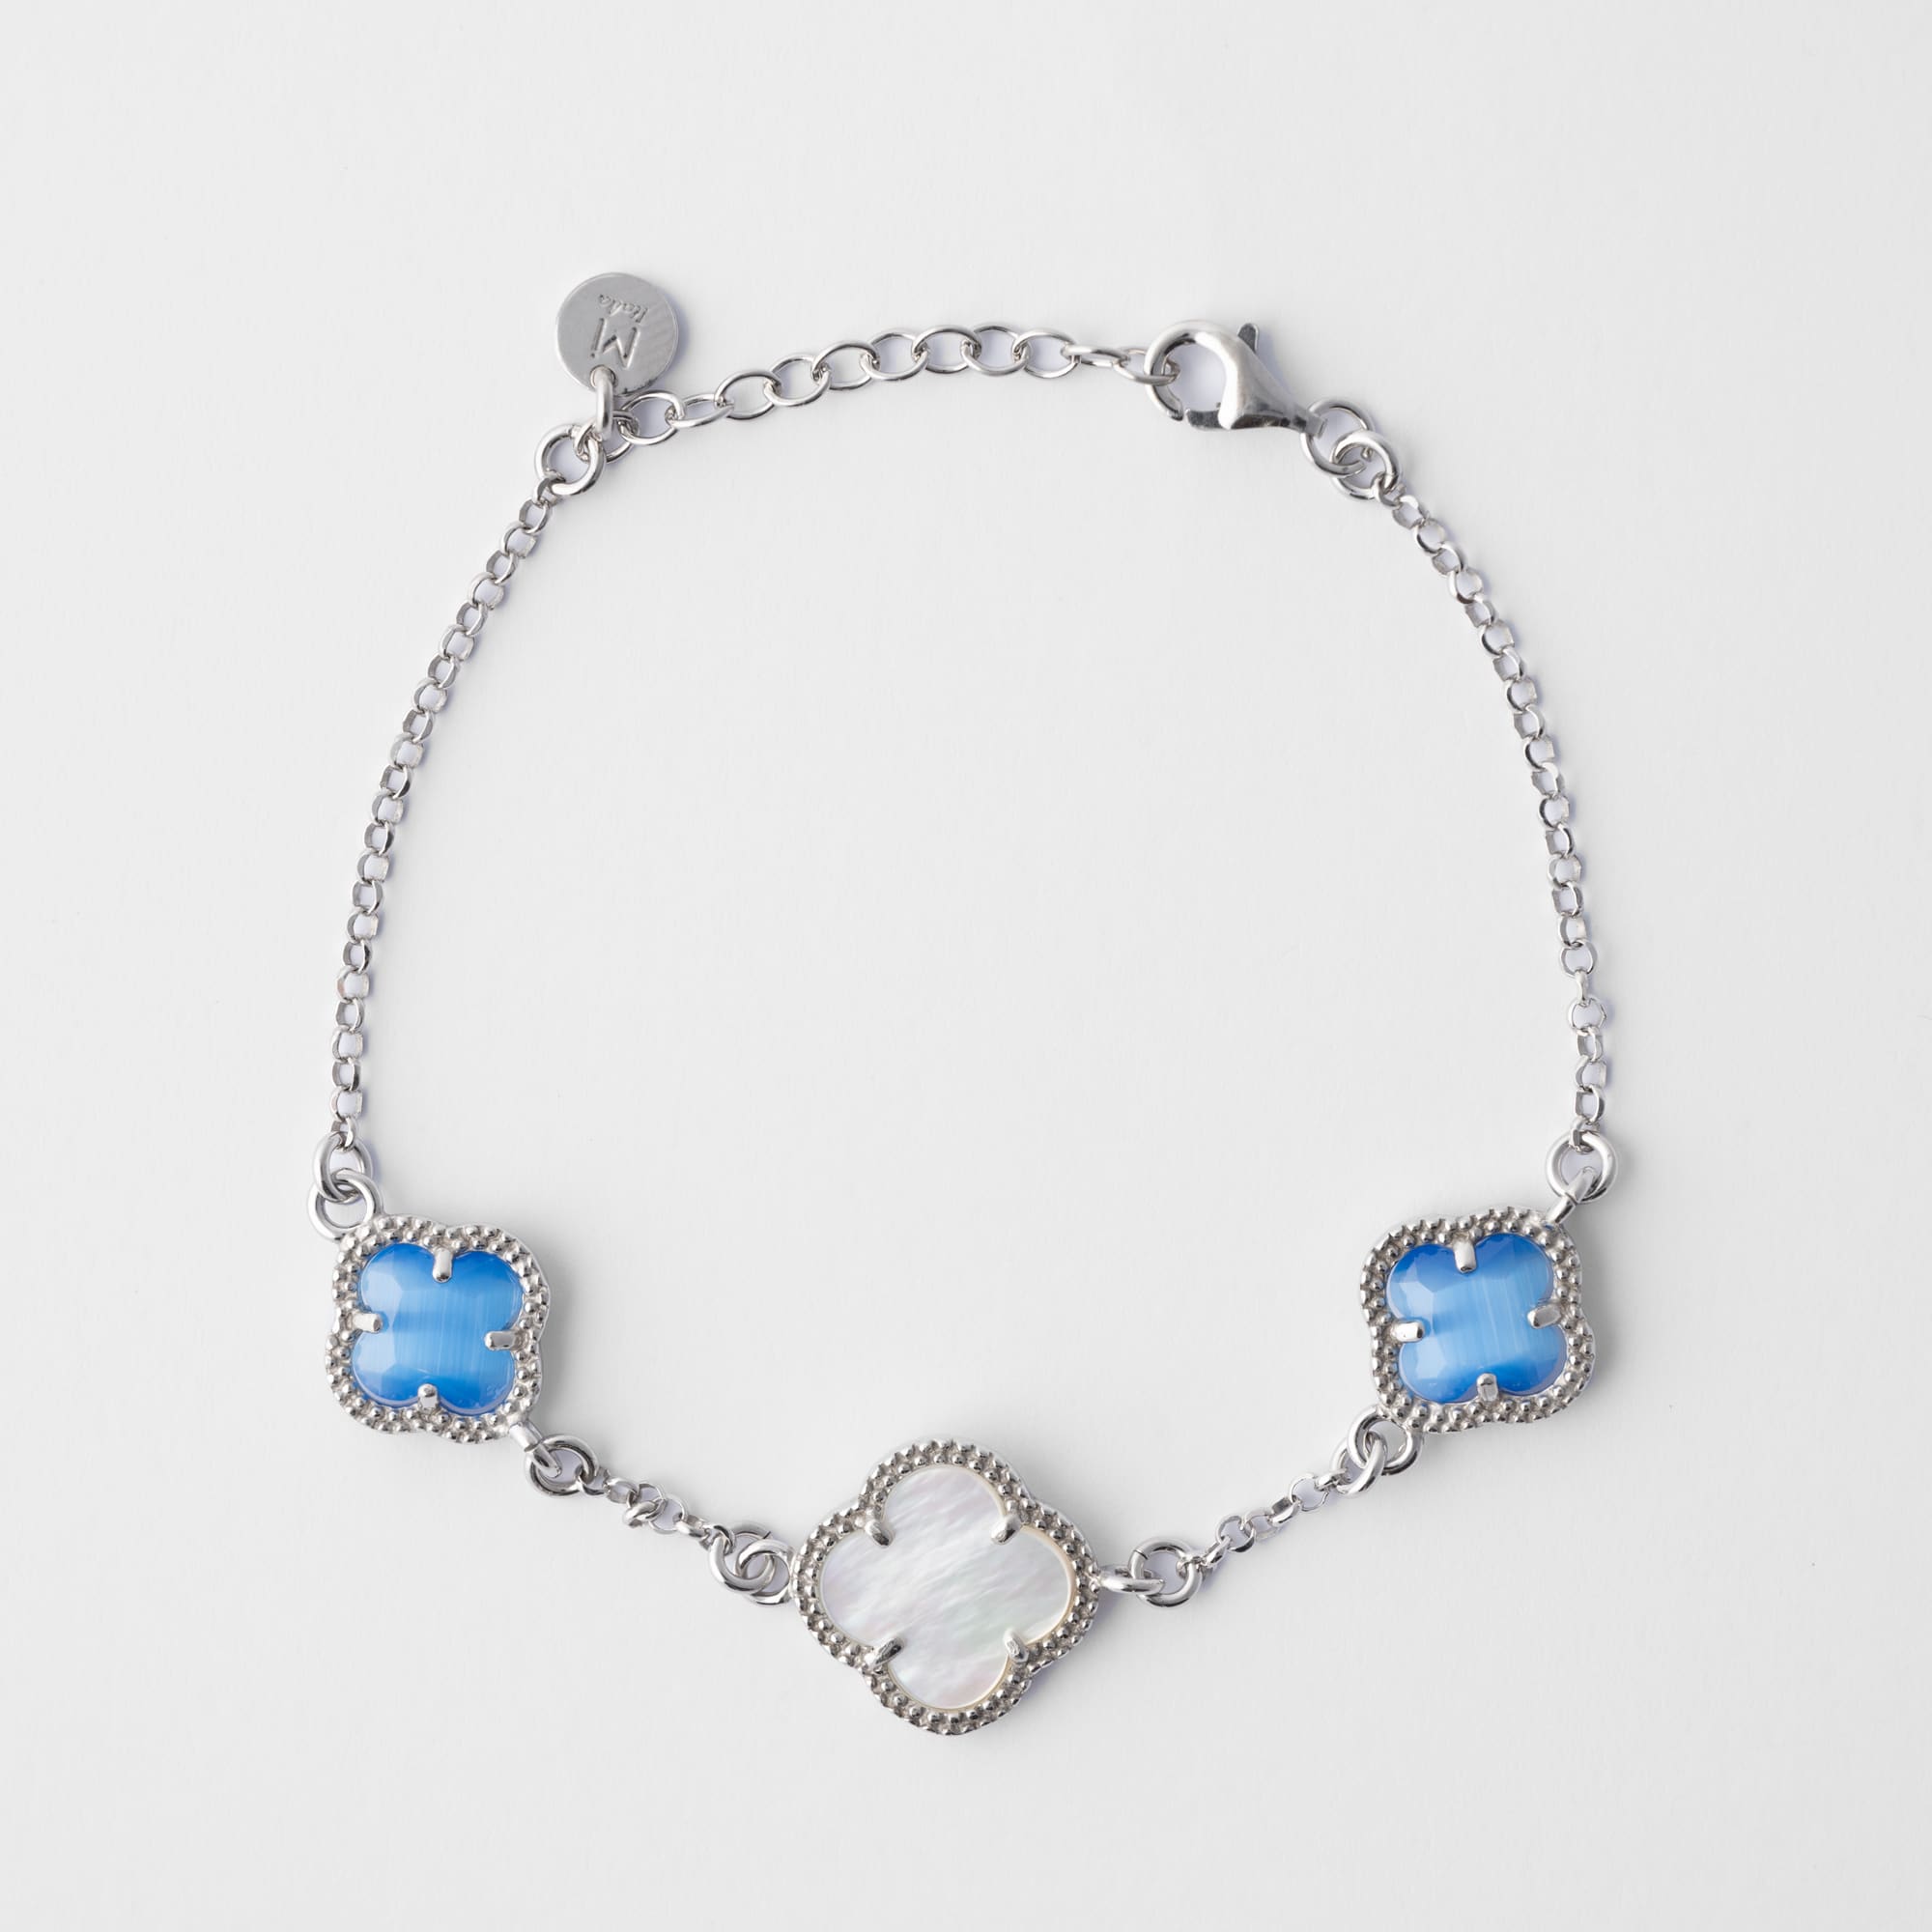 Clover bracelet with blu quartz and mother of pearl